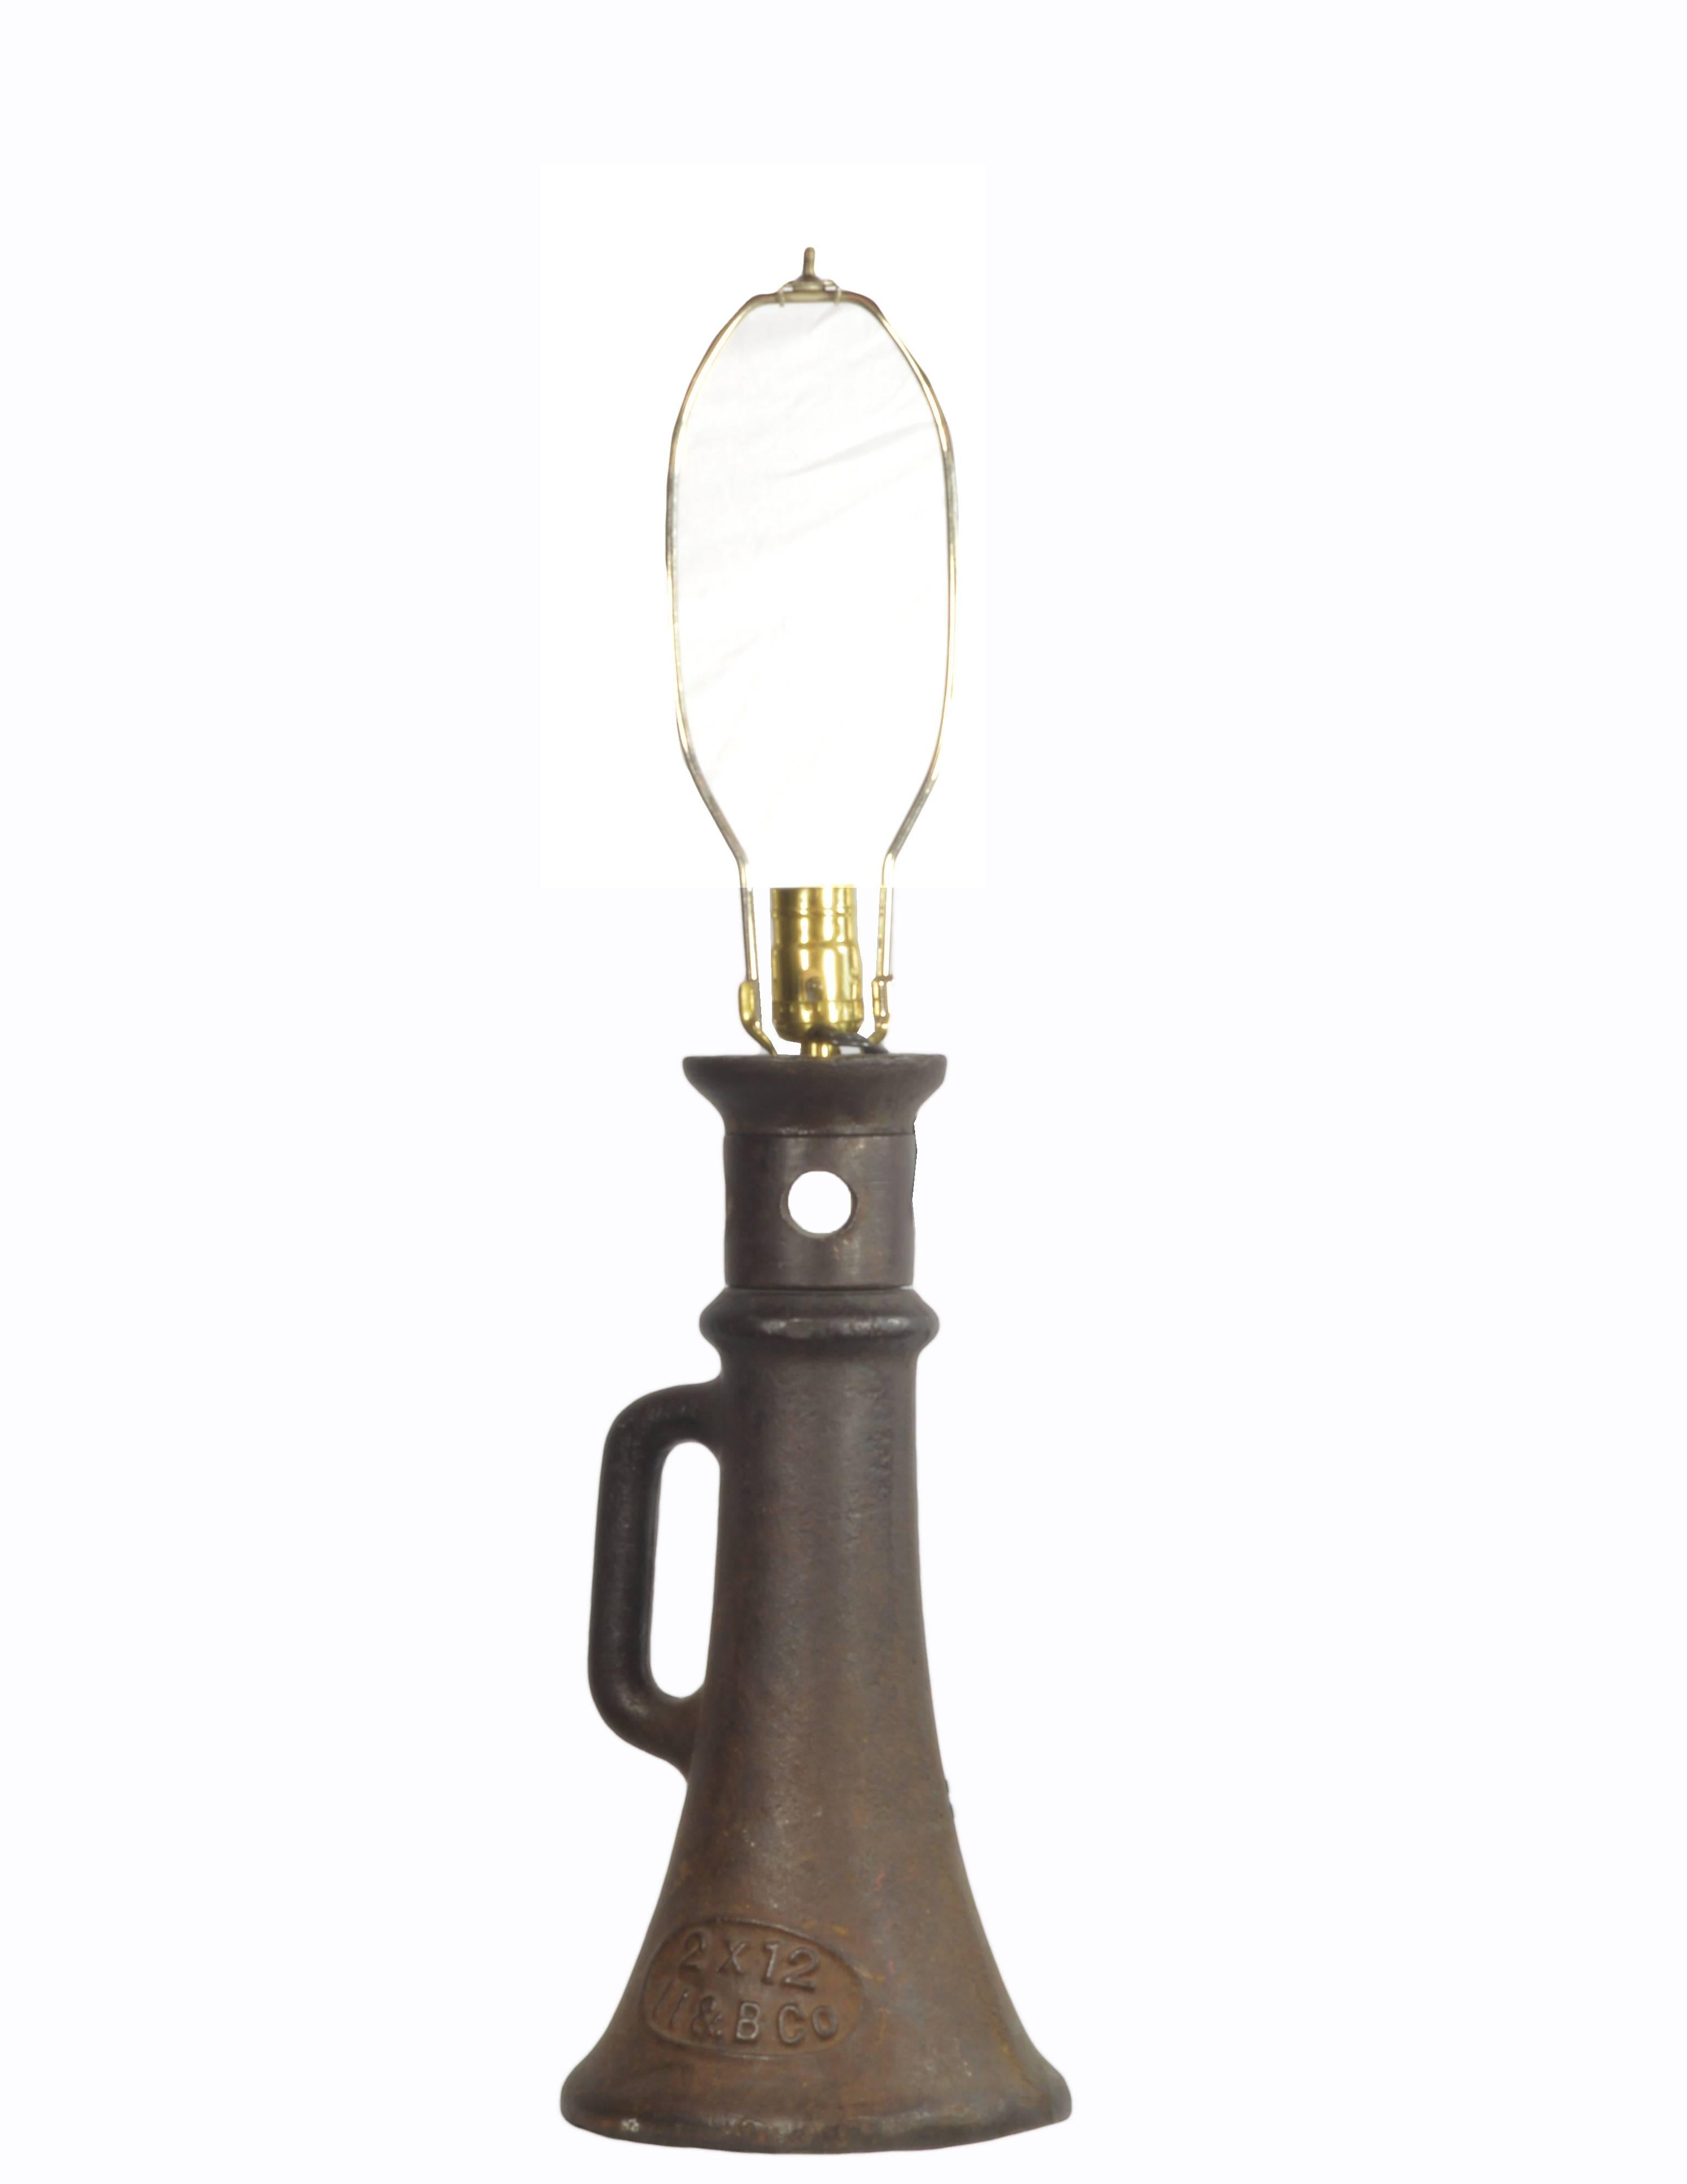 Antique metal leveling jack that was made into a lamp. Shade not included.

Offered by Neal Beckstedt